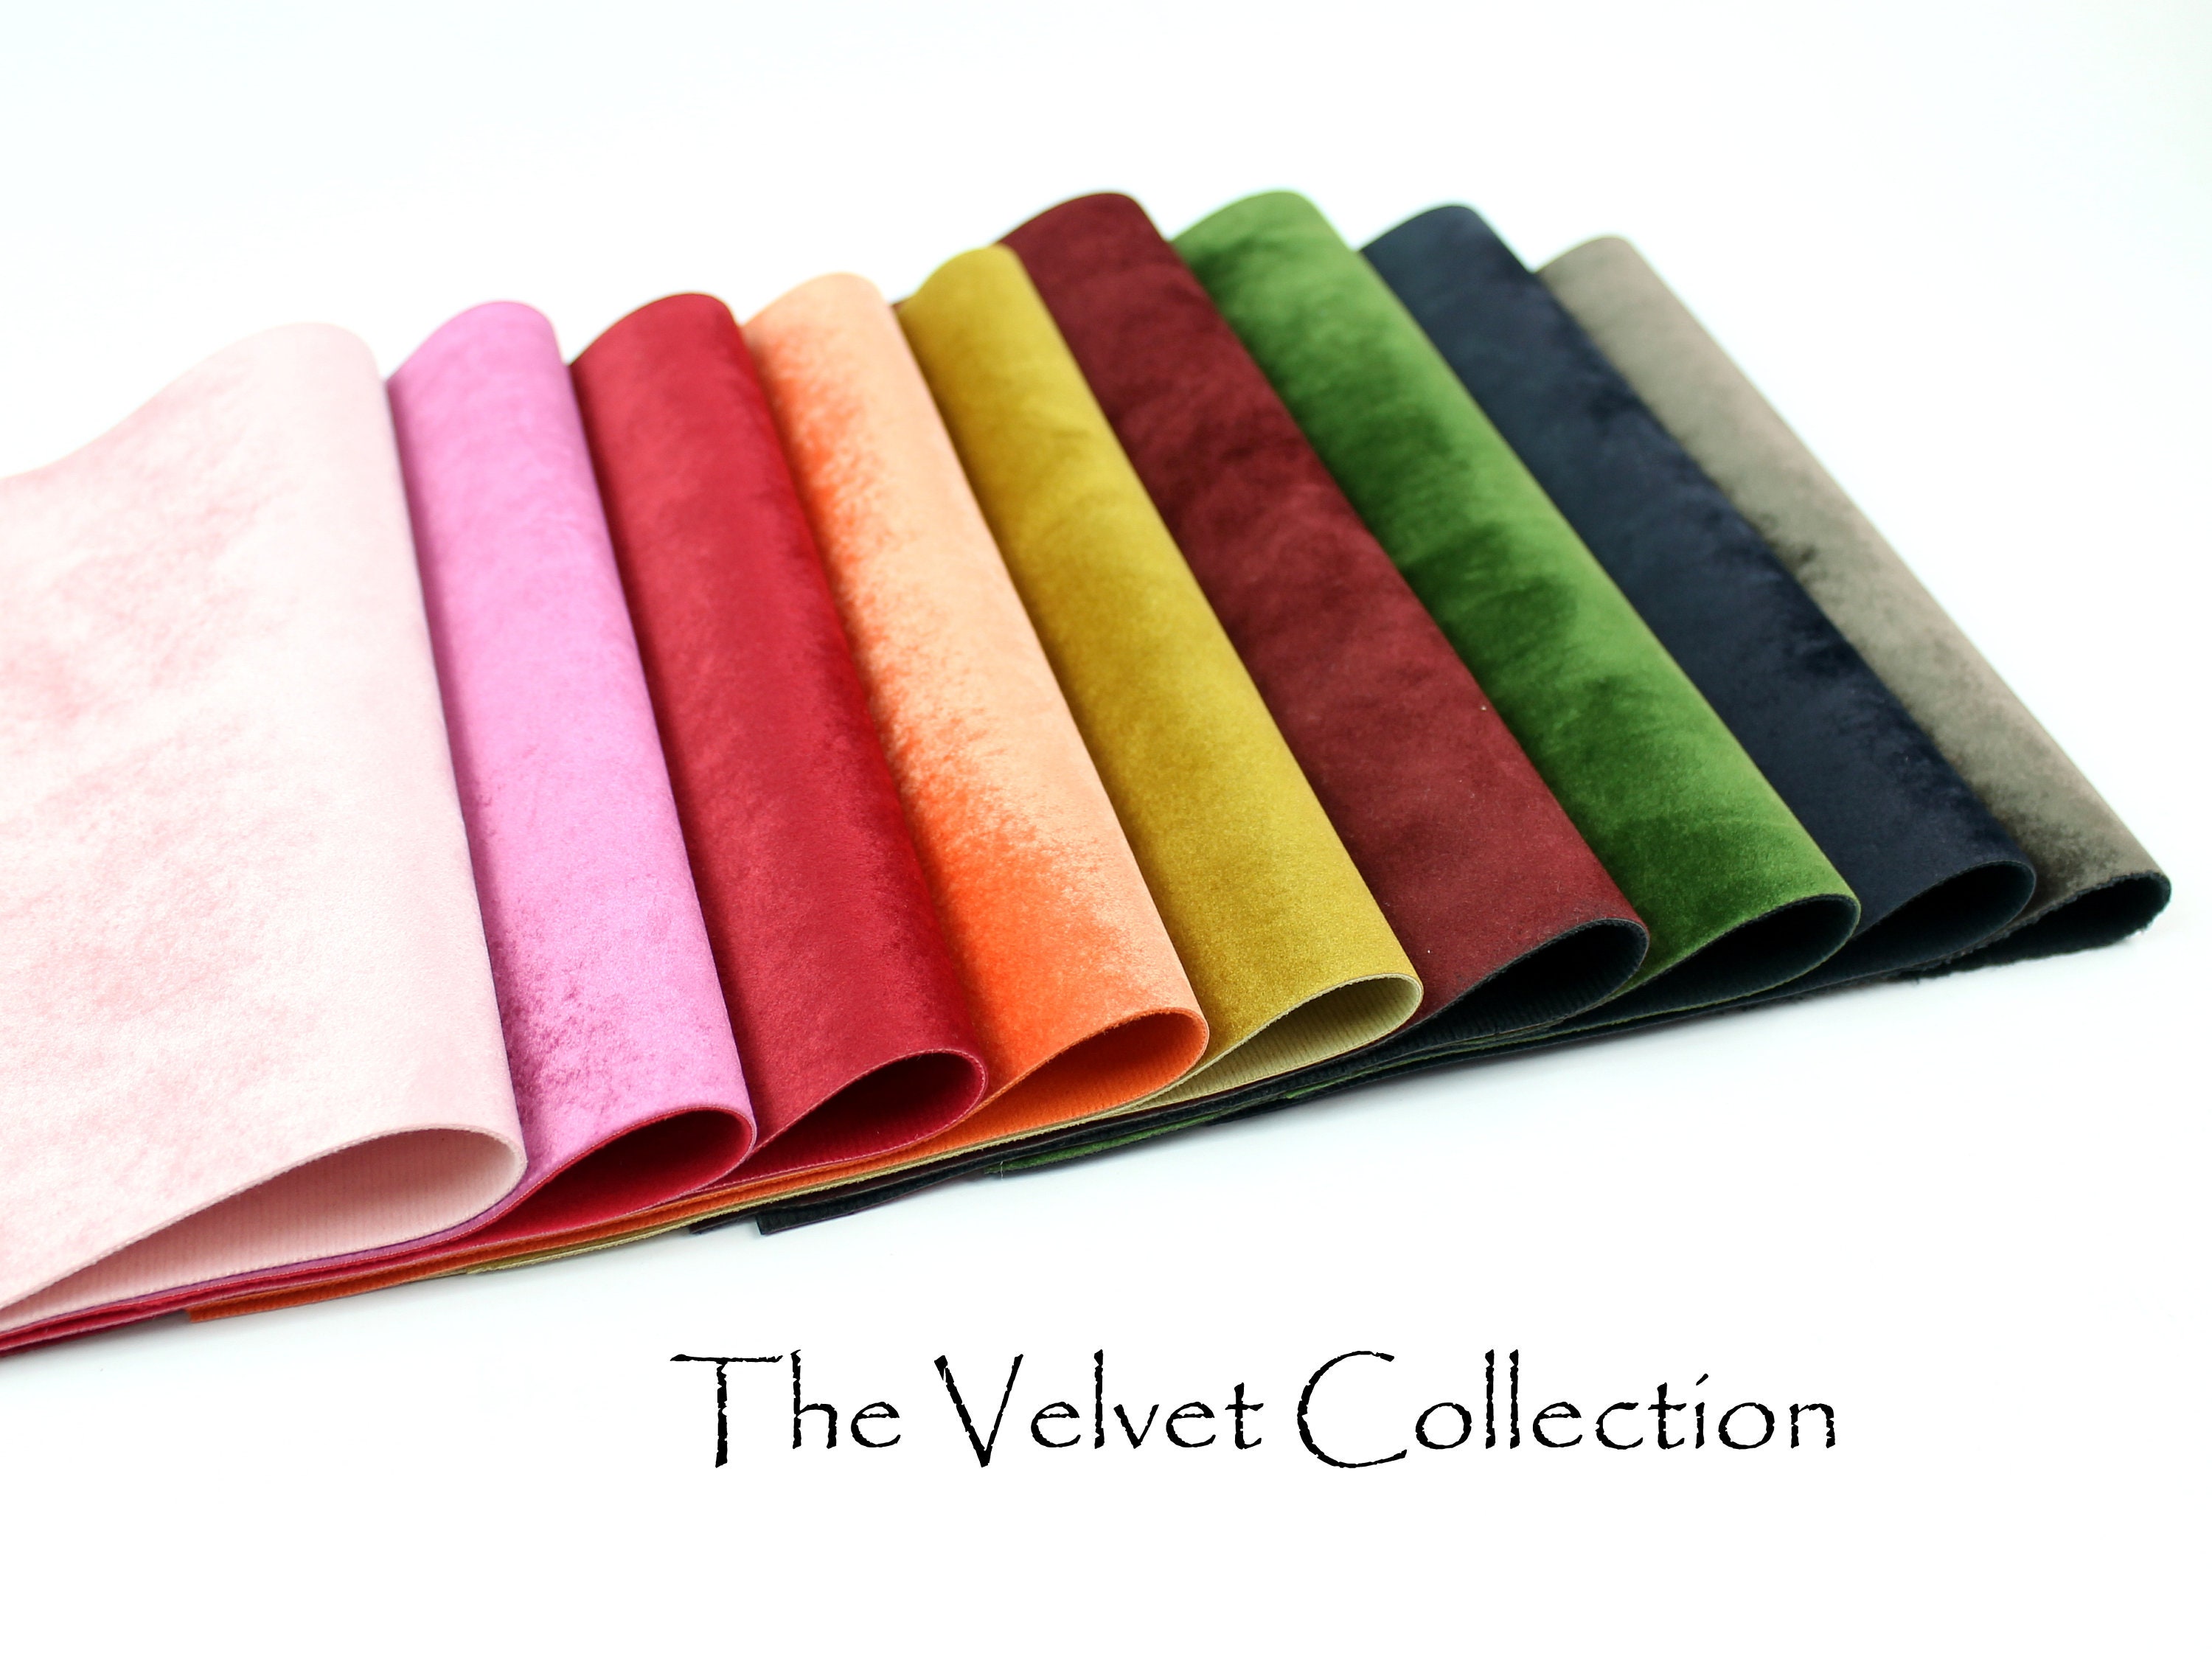 Adhesive Velvet Roll of Fabric for Crafts (17.7 x 78.7 In, Black) –  BrightCreationsOfficial